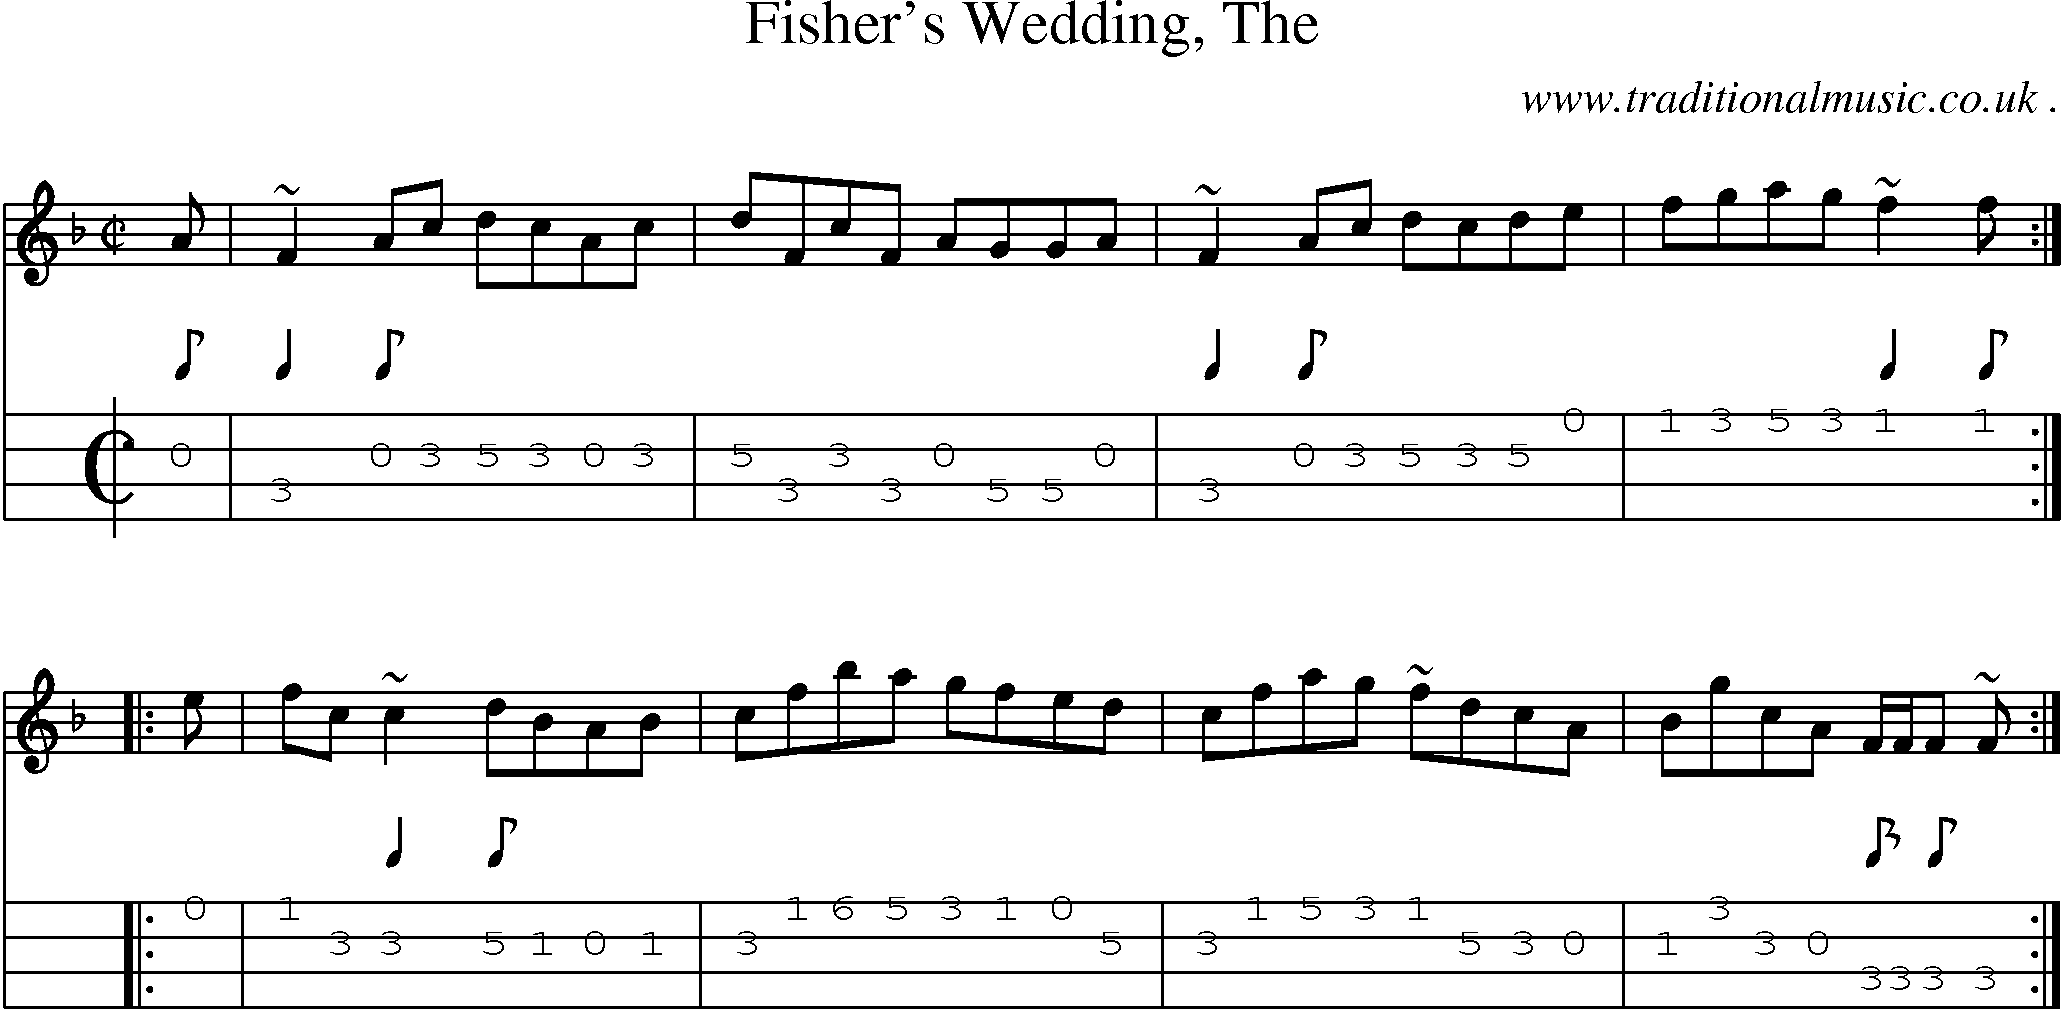 Sheet-music  score, Chords and Mandolin Tabs for Fishers Wedding The